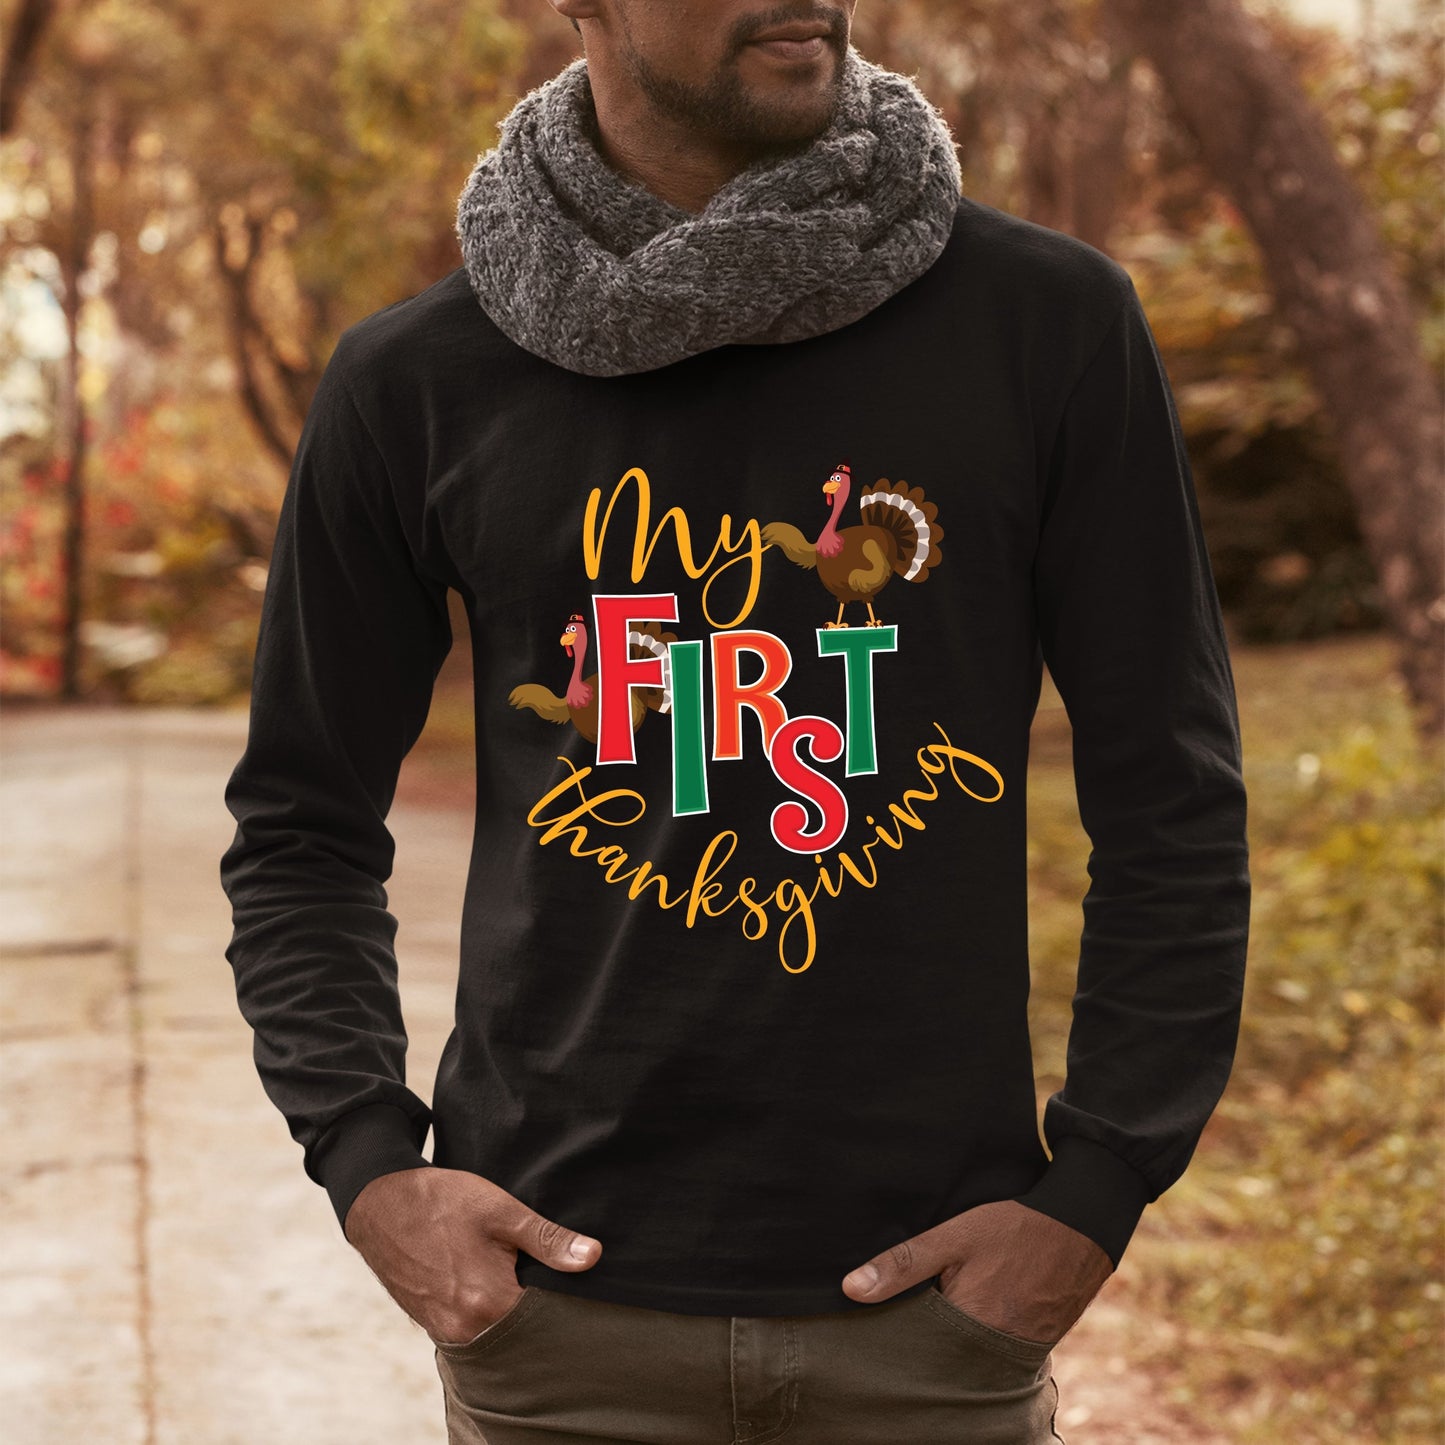 My First Thanks Giving, Thanksgiving Gift Ideas, Cute Thanksgiving, Thanksgiving Sweatshirt, Thanksgiving Sweater for Men